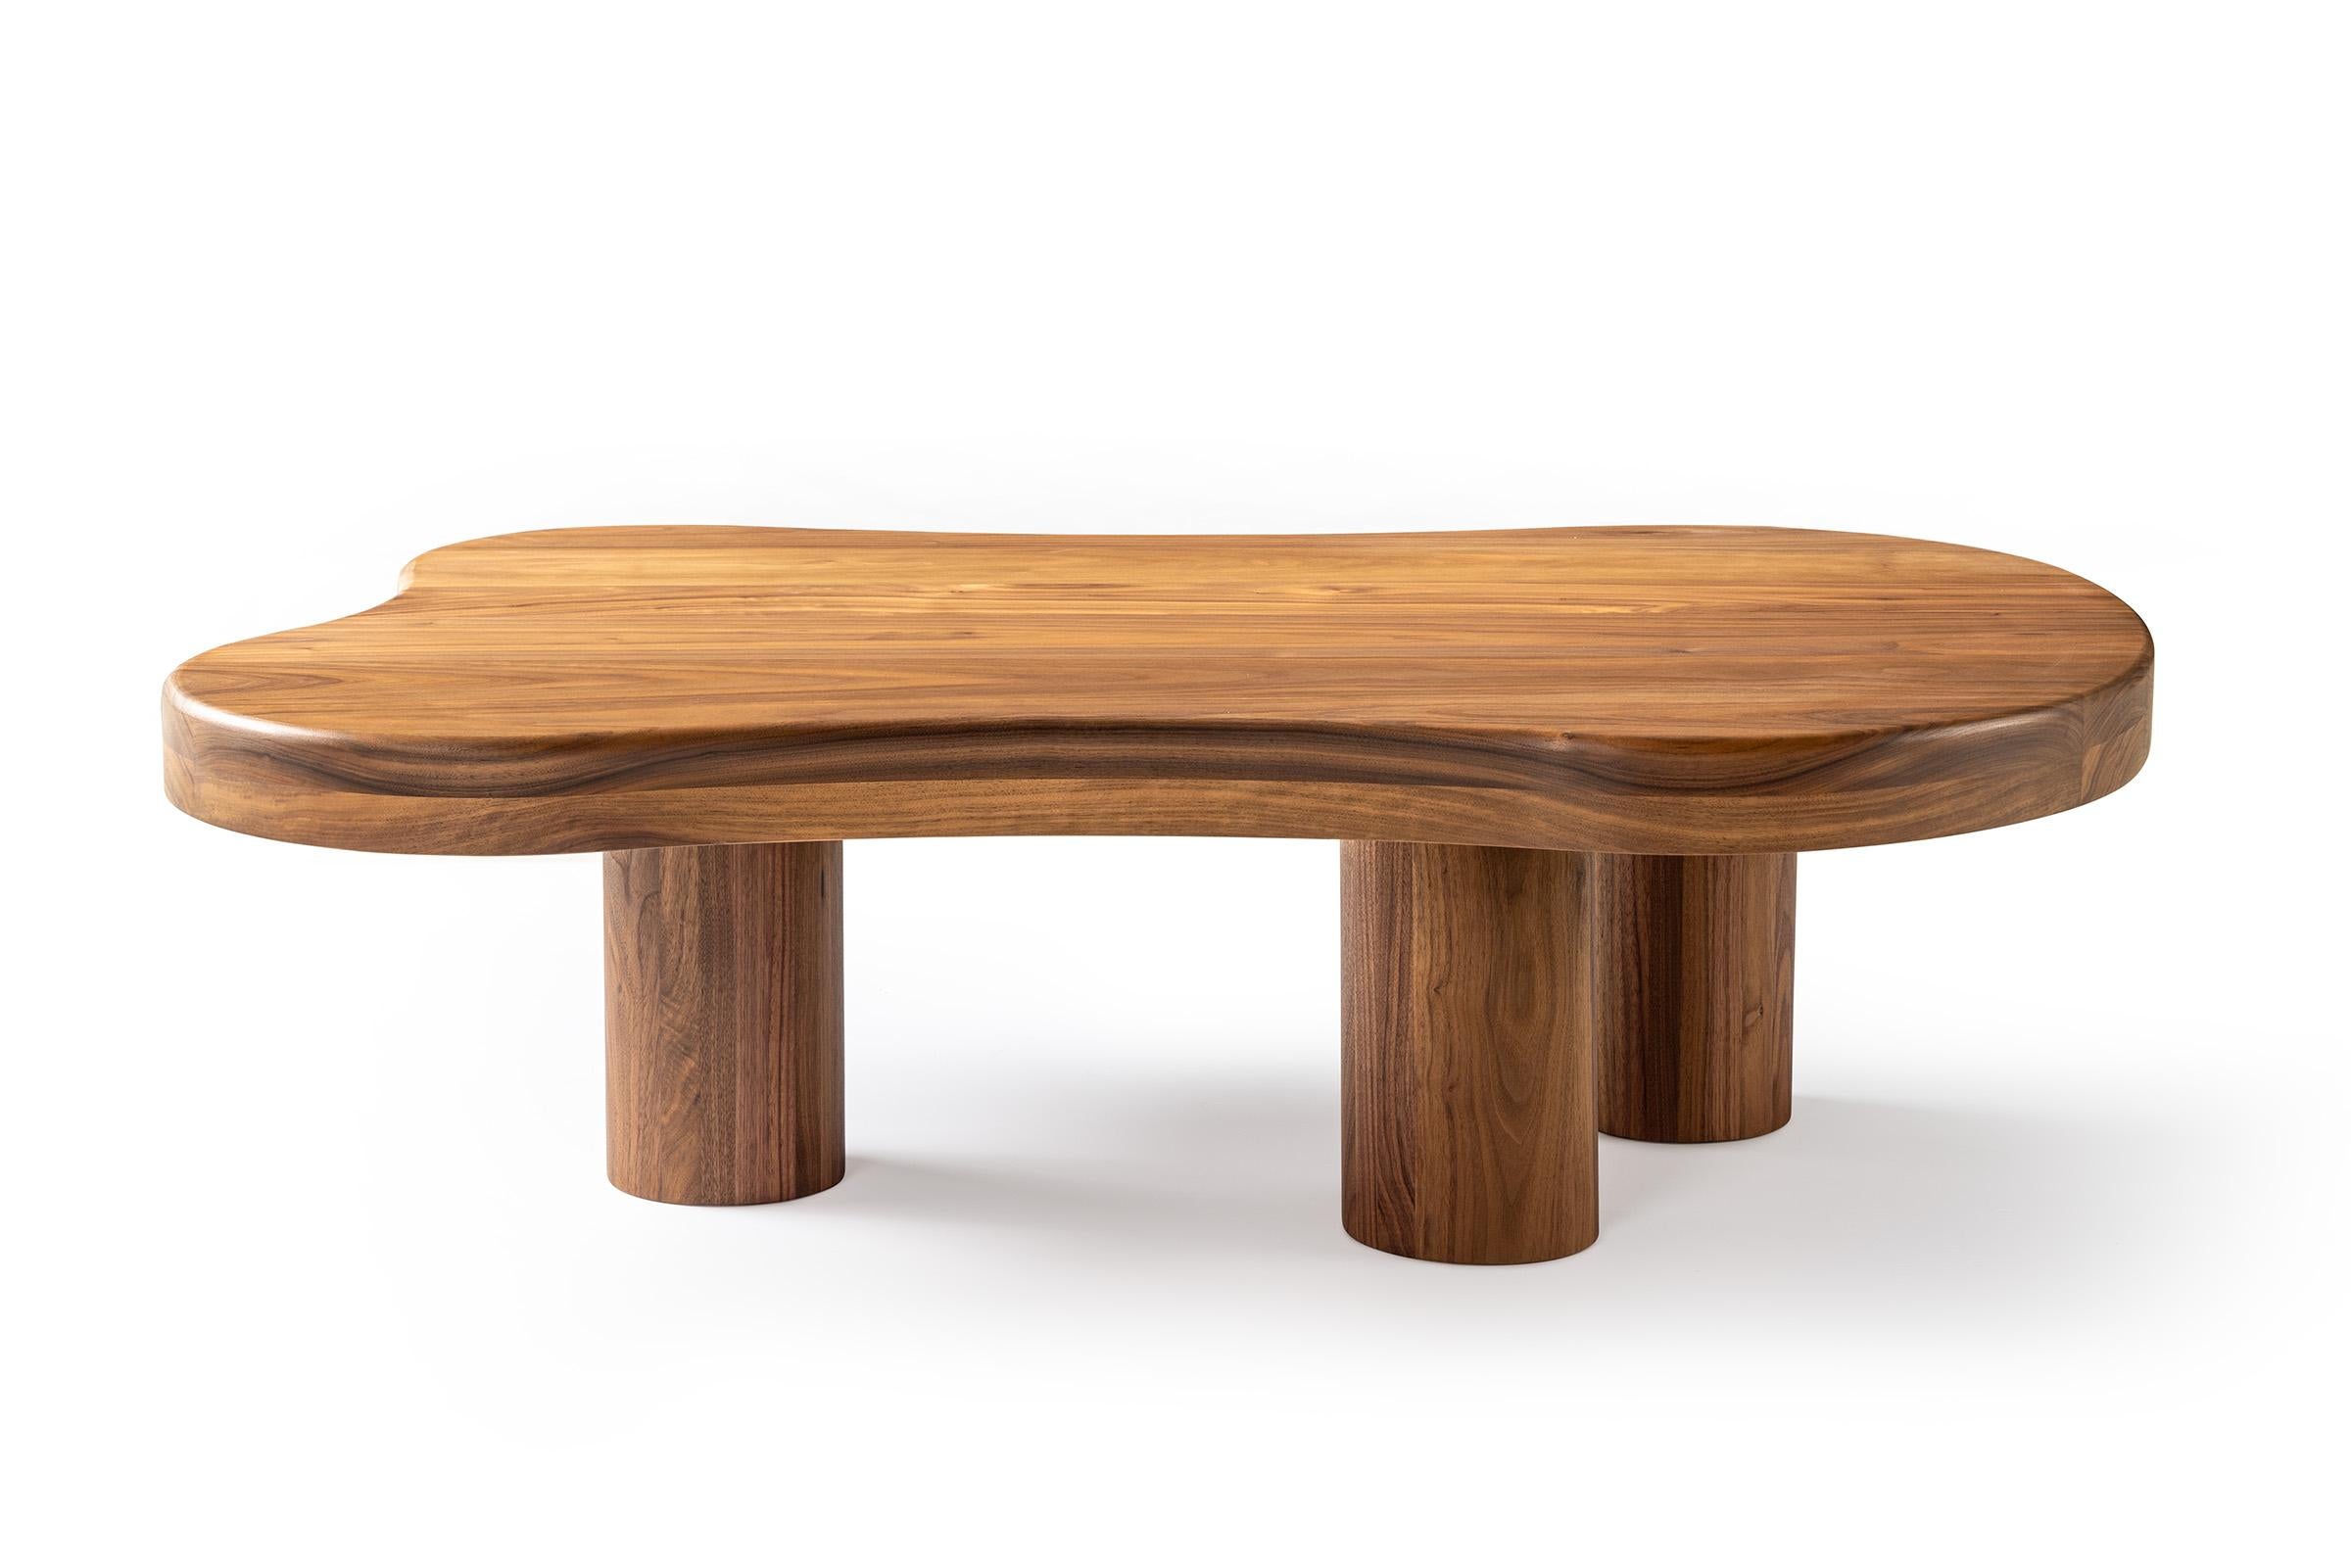 The Wild Spirit coffee table has various qualities that make it a striking piece of furniture. The design radiates both toughness and softness, and fits effortlessly in both large and compact living spaces. The shape of the table top creates a